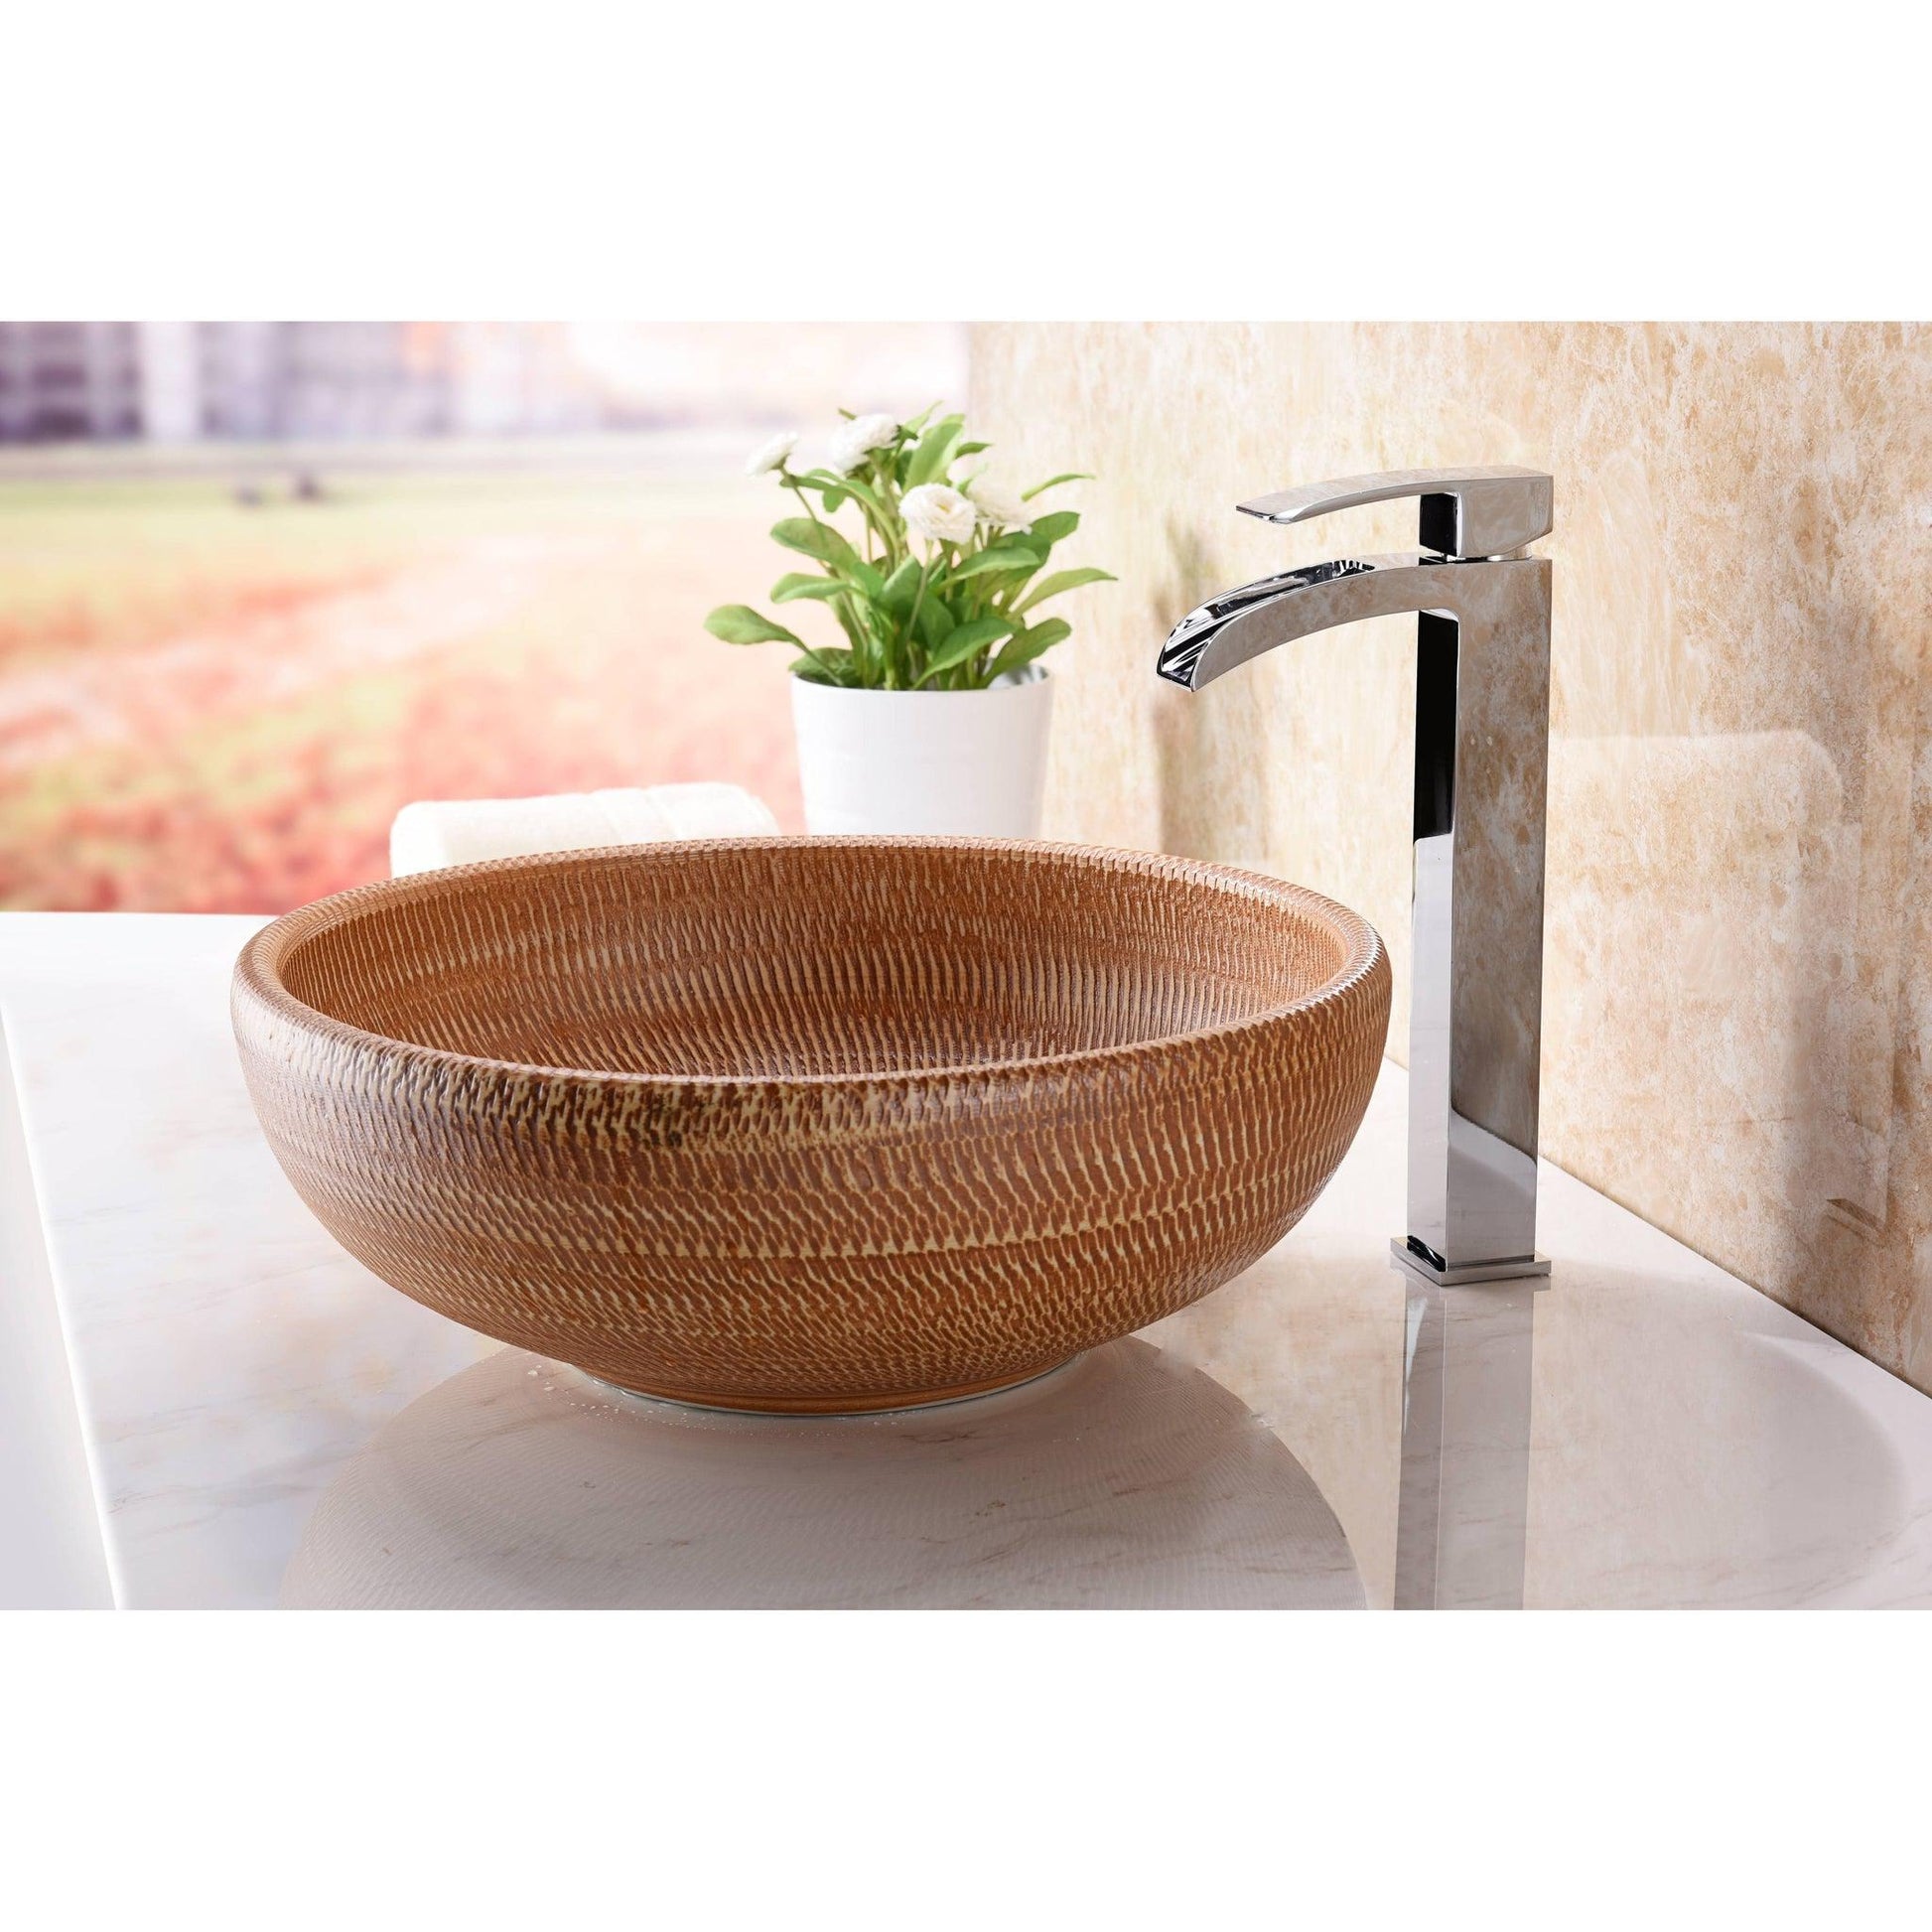 ANZZI Earthen Series 16" x 16" Round Beige Deco-Glass Vessel Sink With Polished Chrome Pop-Up Drain